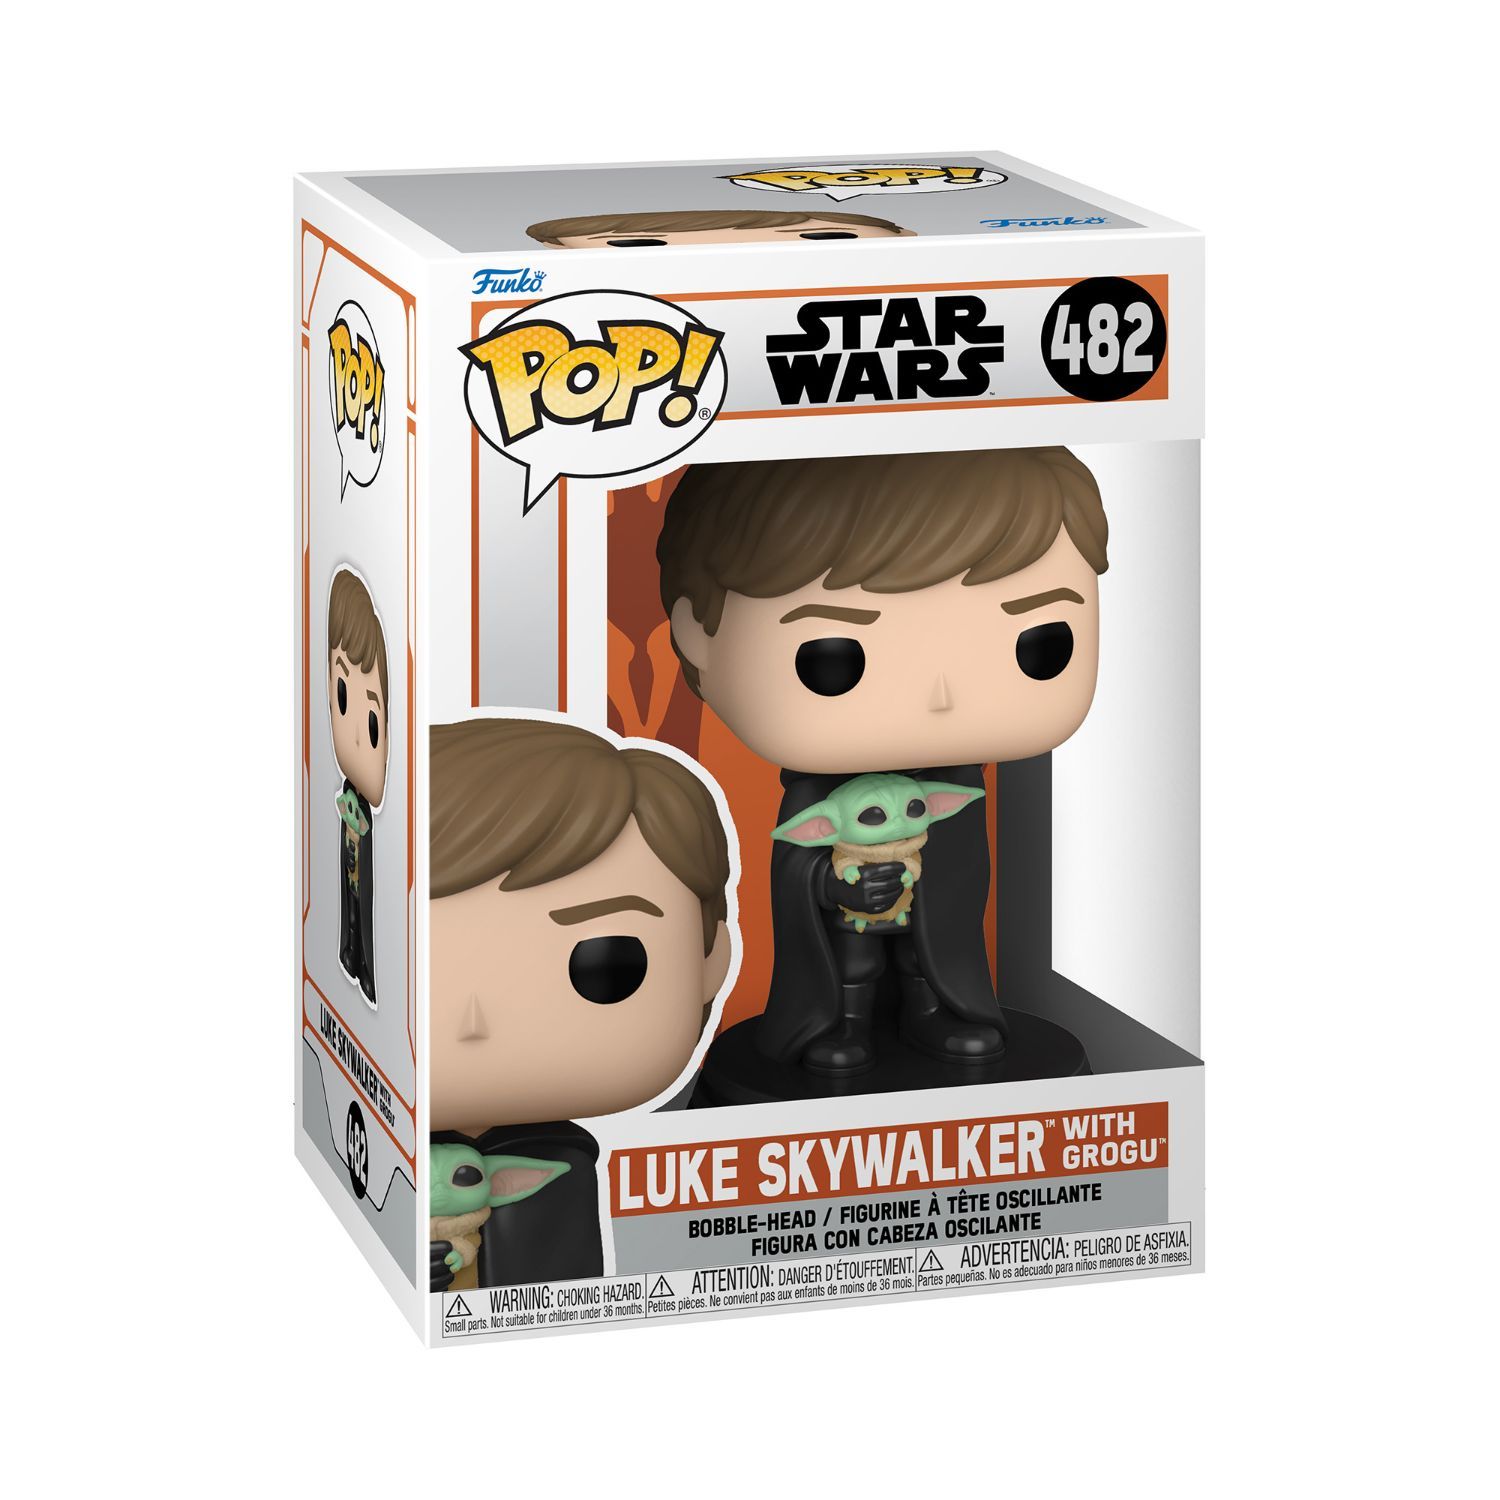 Funko POP Star Wars Bobble Head Collectible featuring Luke Skywalker With Grogu from The Mandalorian